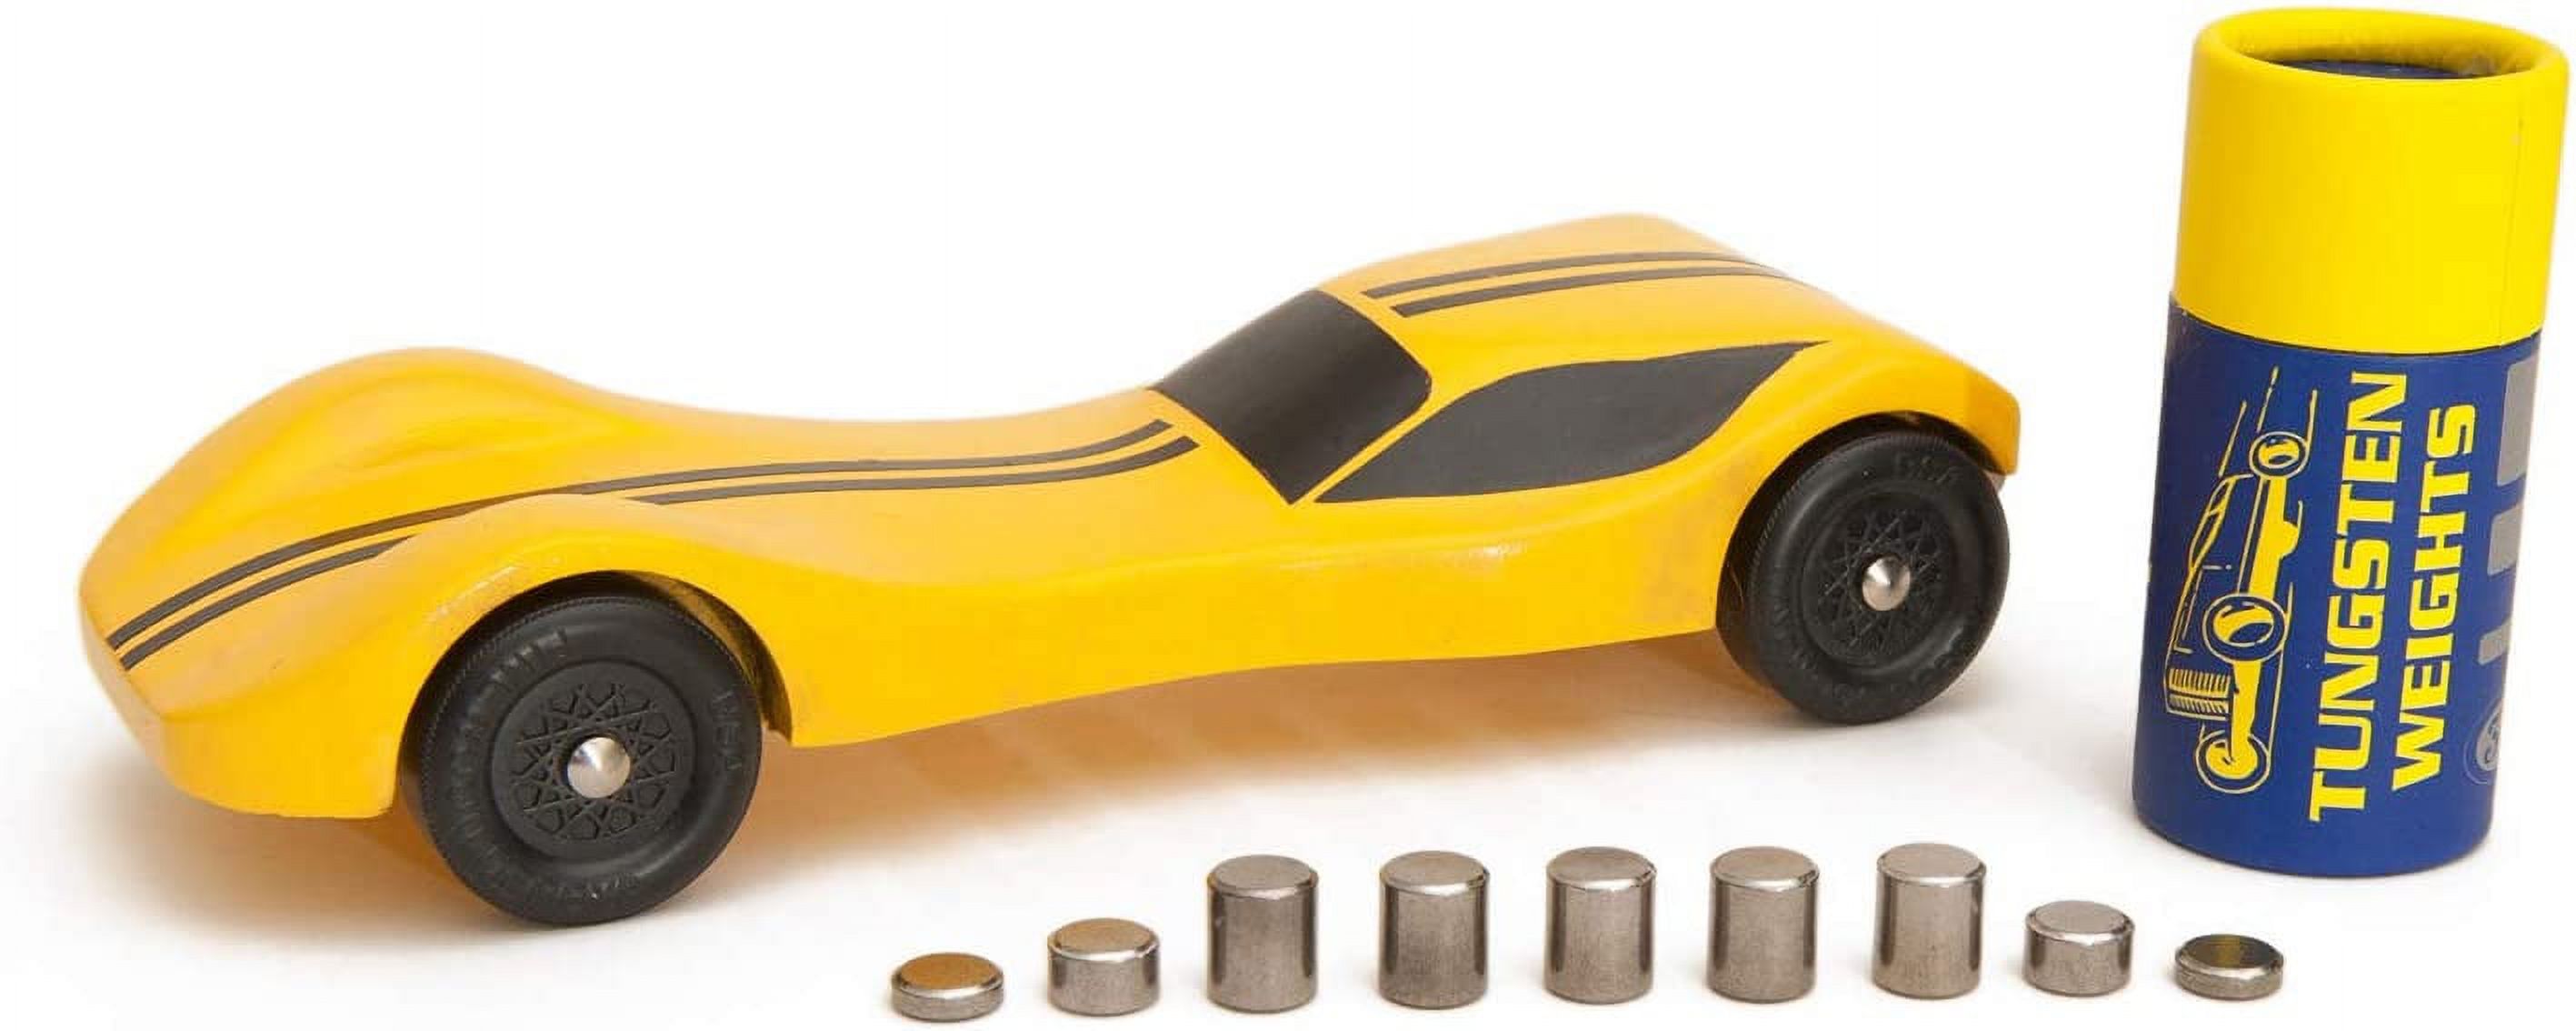 Pinewood Car Derby Weights Tungsten 3.25oz. Pine Race Car Power with Varied  Sizes of Incremental Cylinders. Heavy with No Lead. by Dr. Rocket 